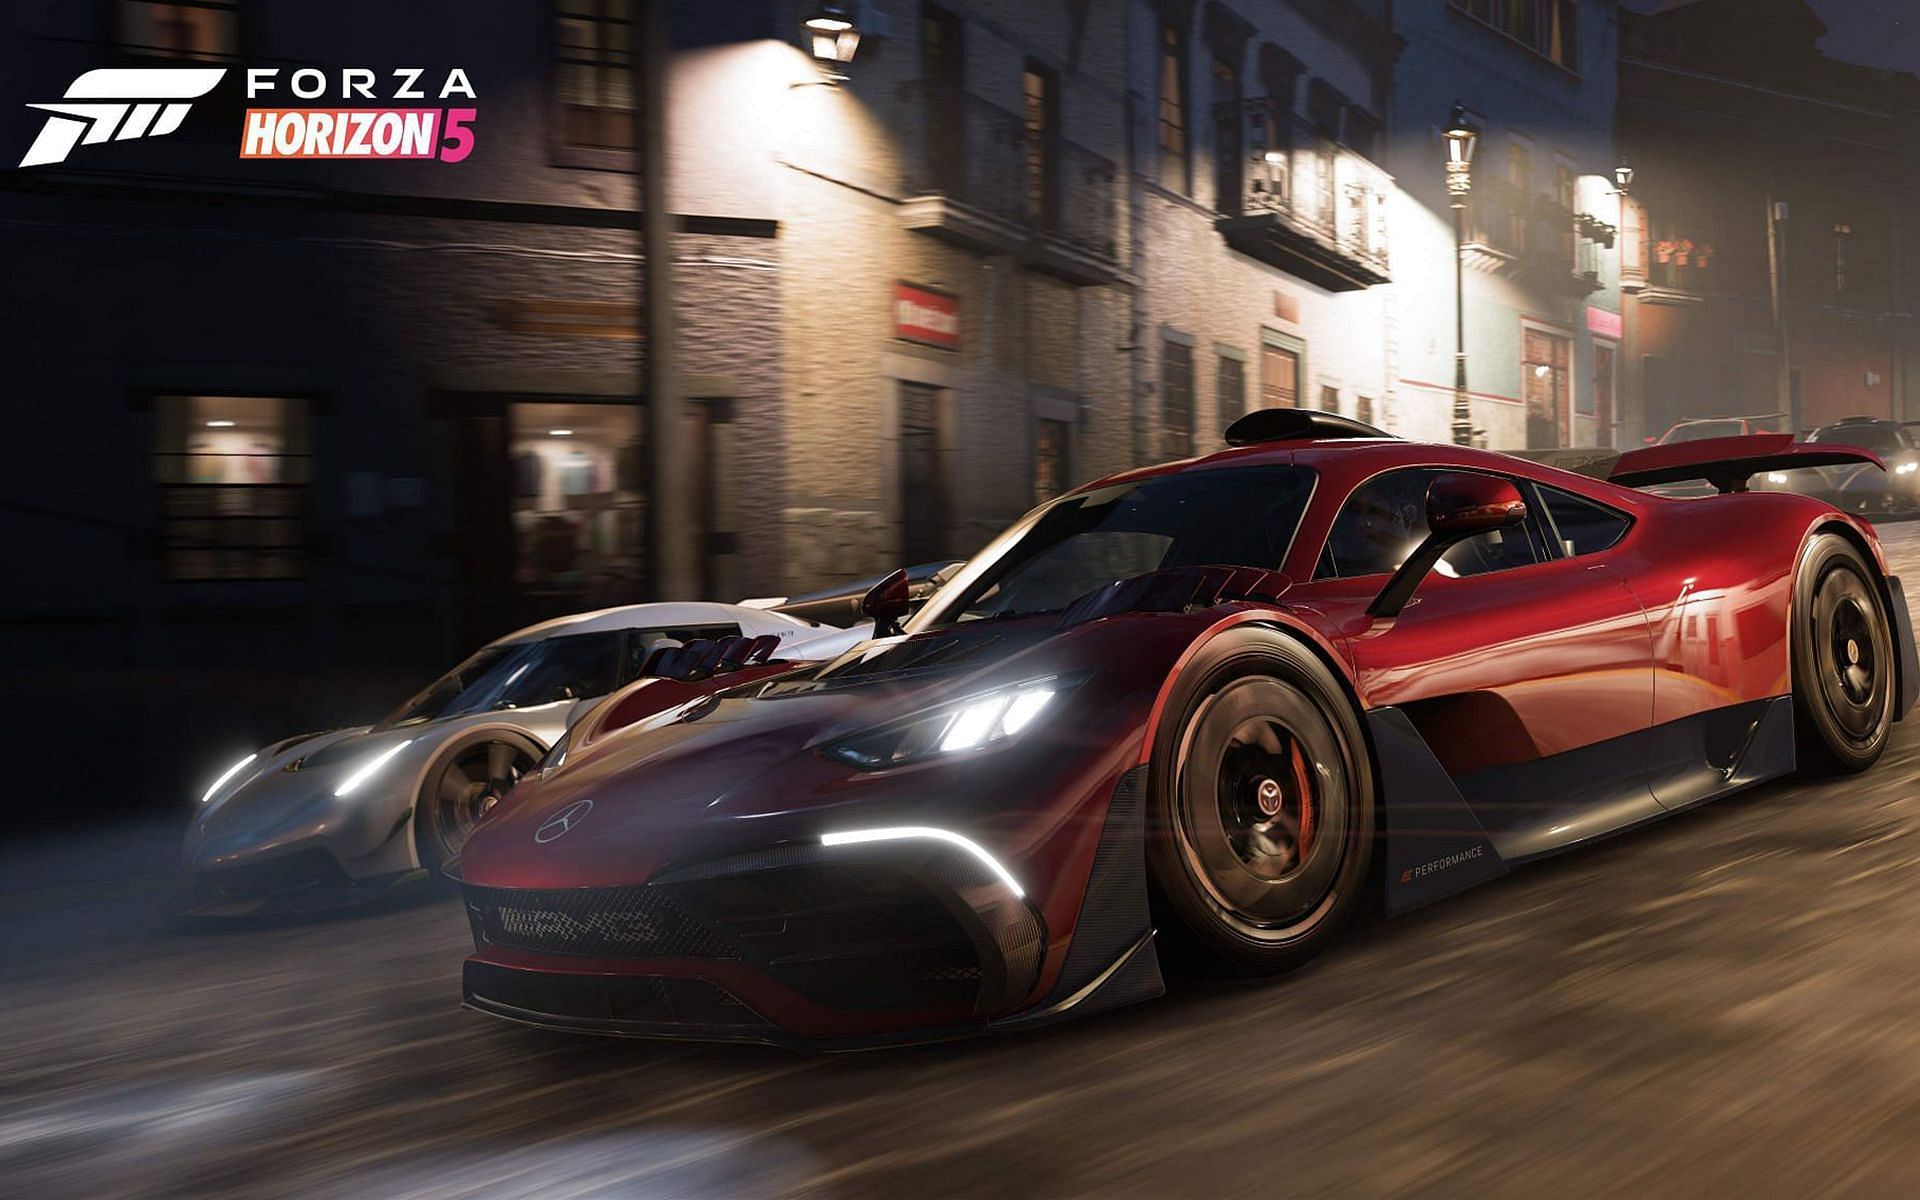 Forza Horizon 5 Series 4 is rumored to include a new map (Image via Playground Games)